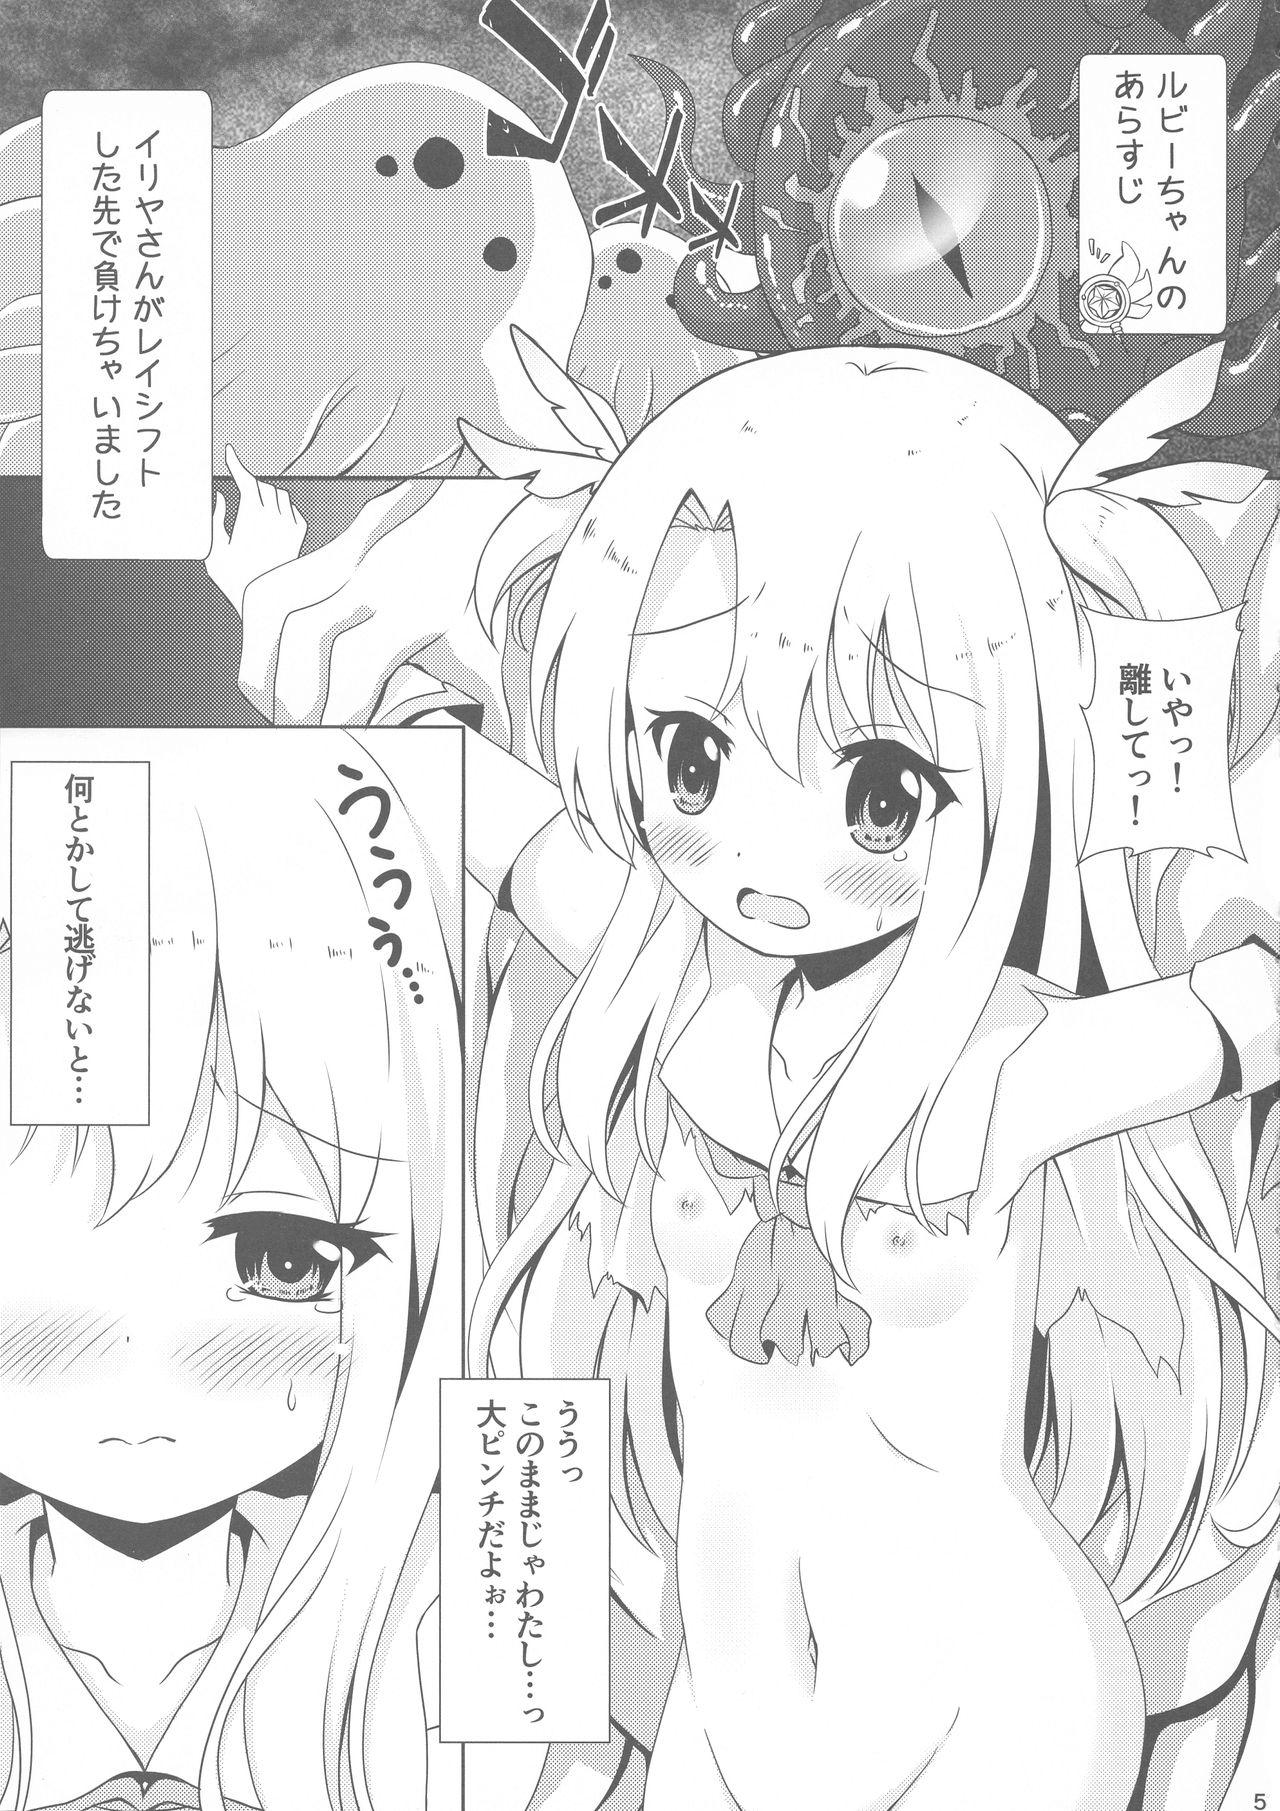 Candid Makenaide Illya-chan - Fate kaleid liner prisma illya Missionary Porn - Page 5